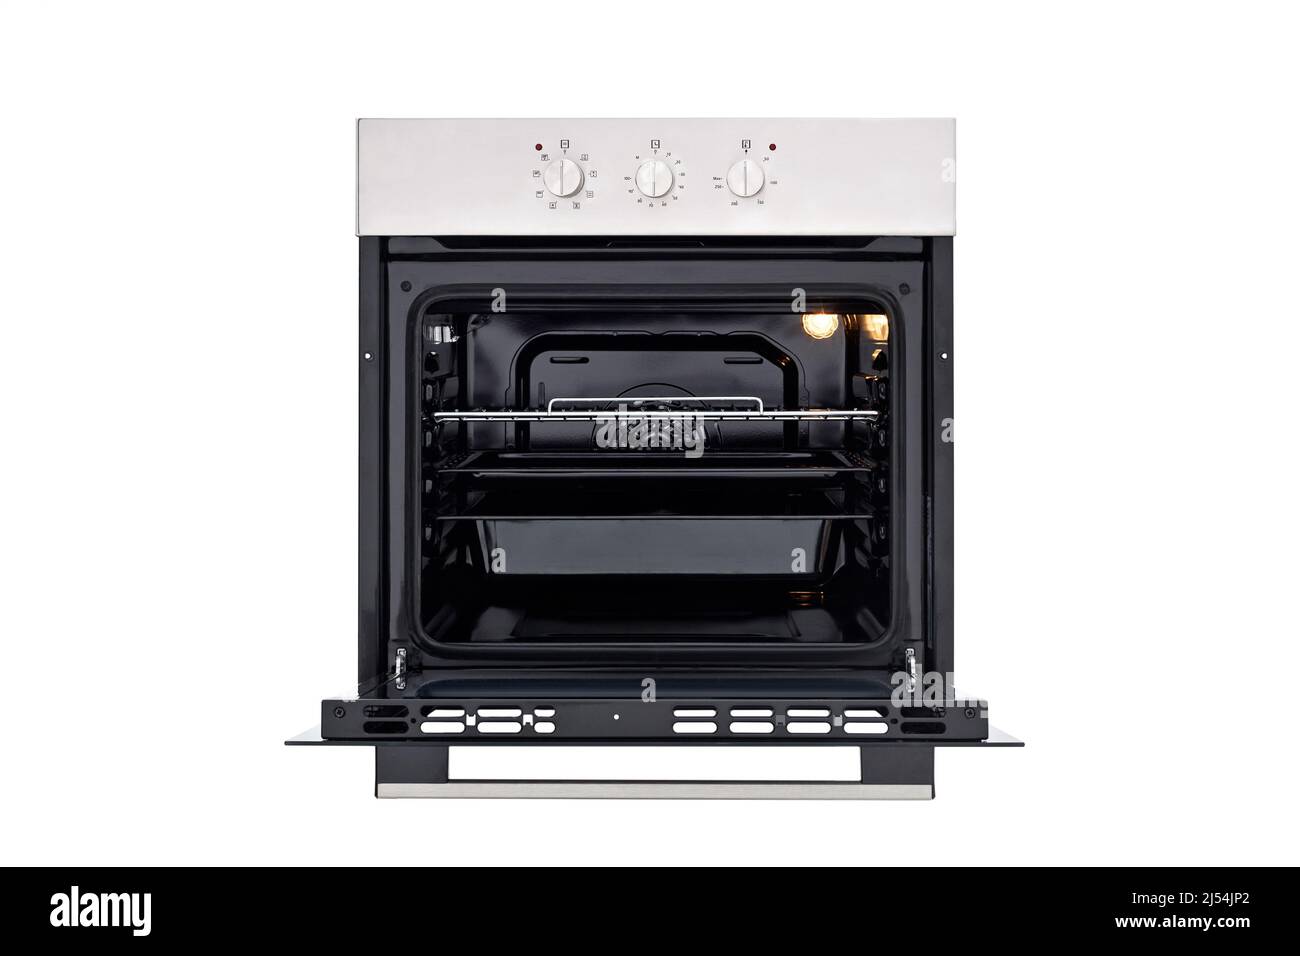 Black oven with silver top, three control knobs. Open door, three trays and lights on. Front view Stock Photo